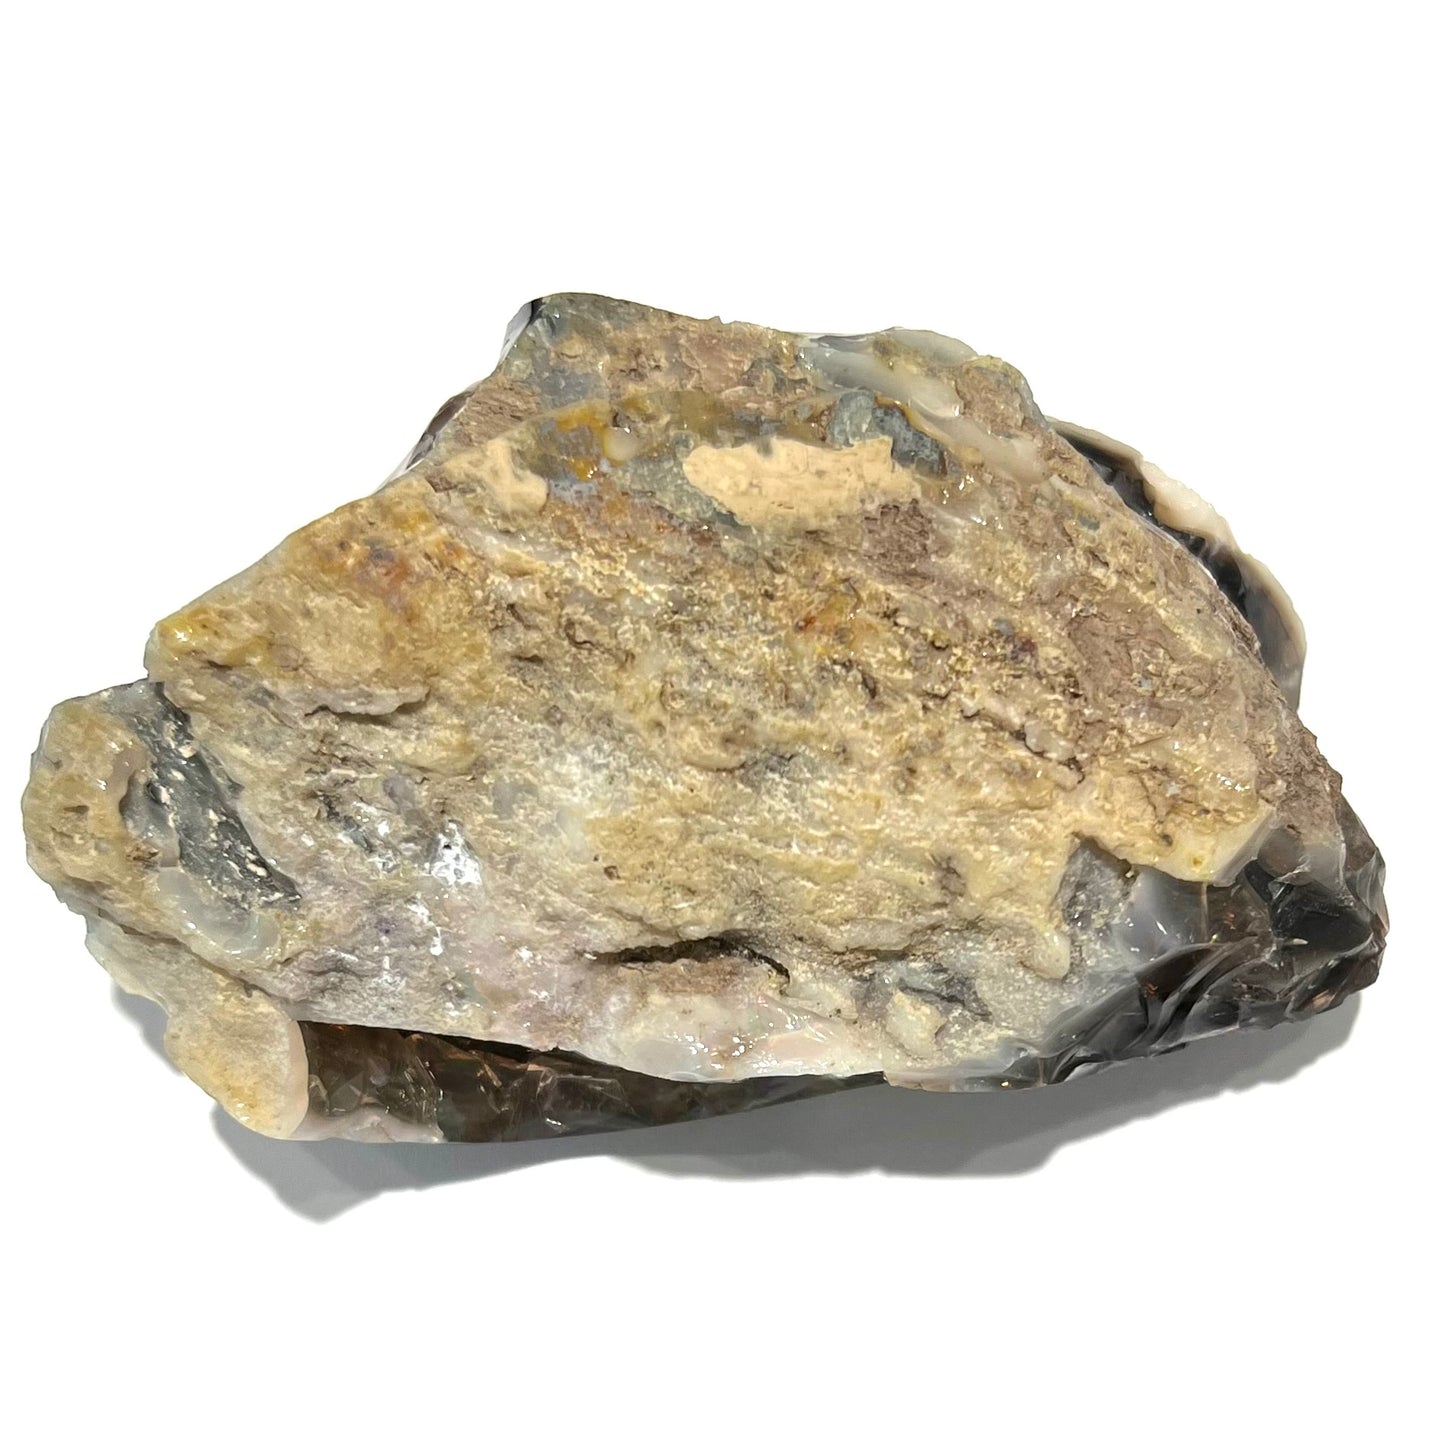 A brown opal crystal specimen from Virgin Valley, Nevada.